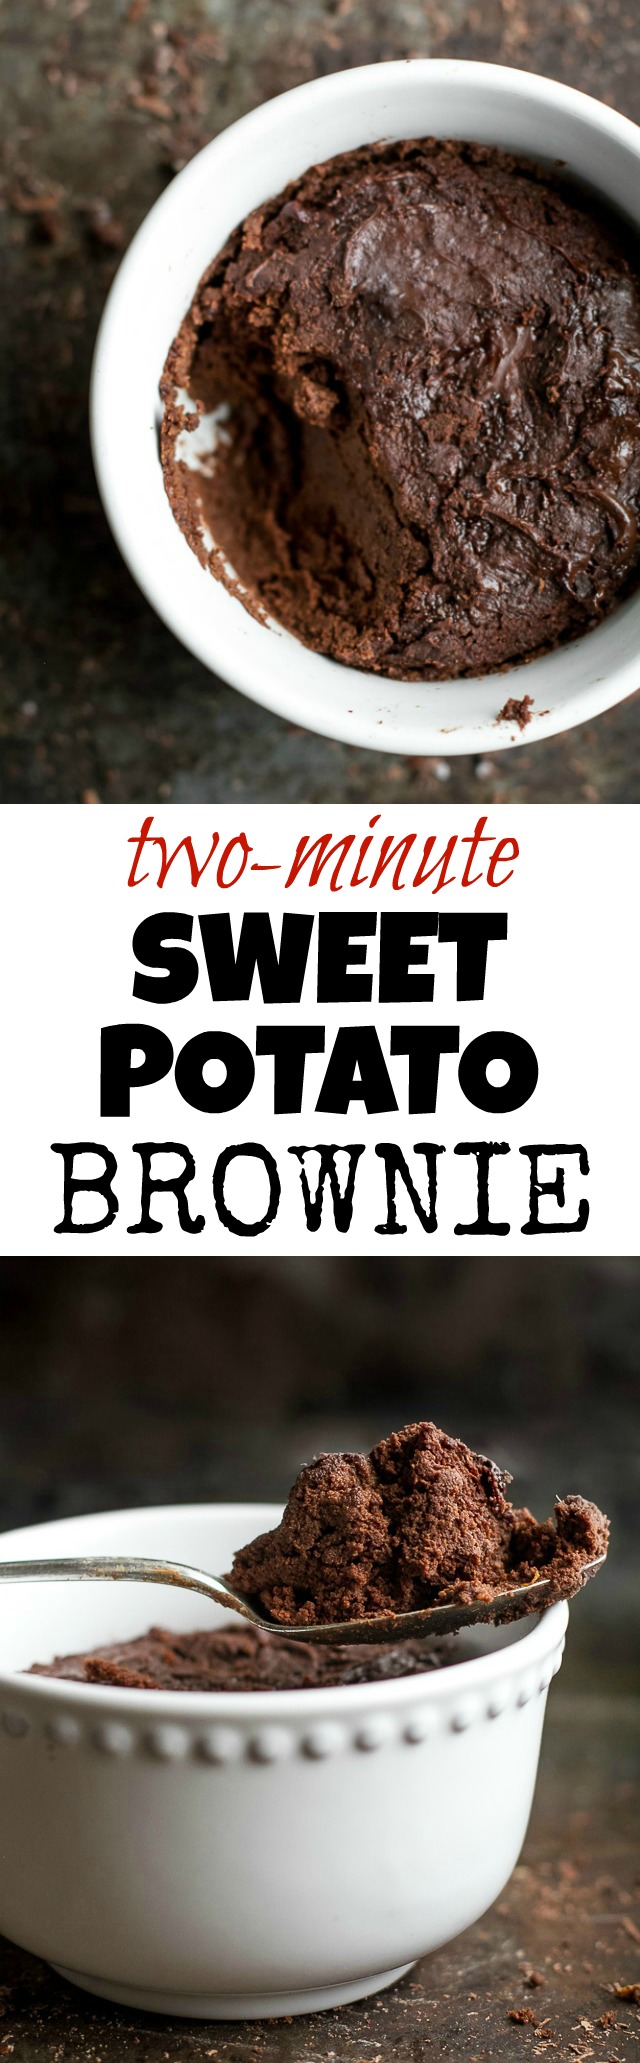 This healthy Two Minute Sweet Potato Brownie recipe is so fudgy, dense, and chocolatey, that you'd never be able to tell it's made with NO flour, NO butter, and NO oil! | runningwithspoons.com {vegan, paleo, gluten free}